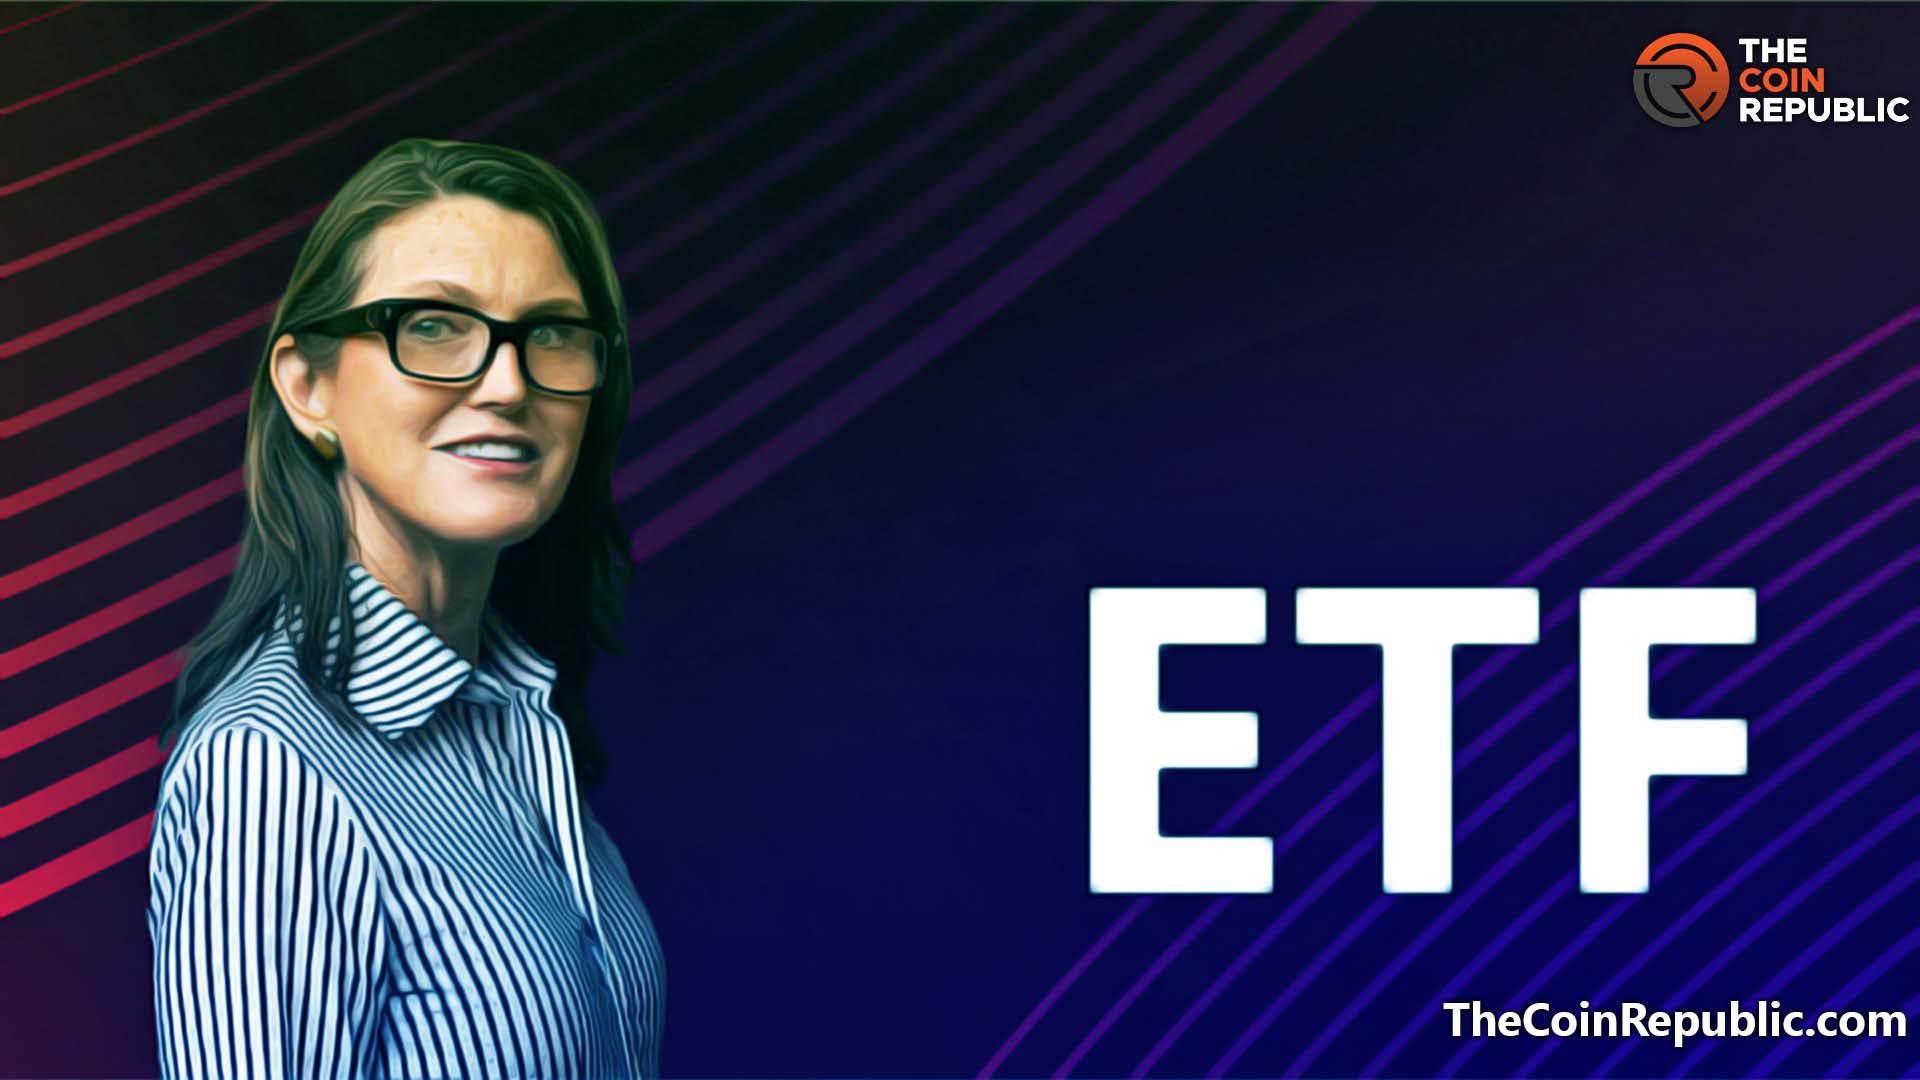 Cathie Wood’s Ark Innovation ETF witnesses its best month this January